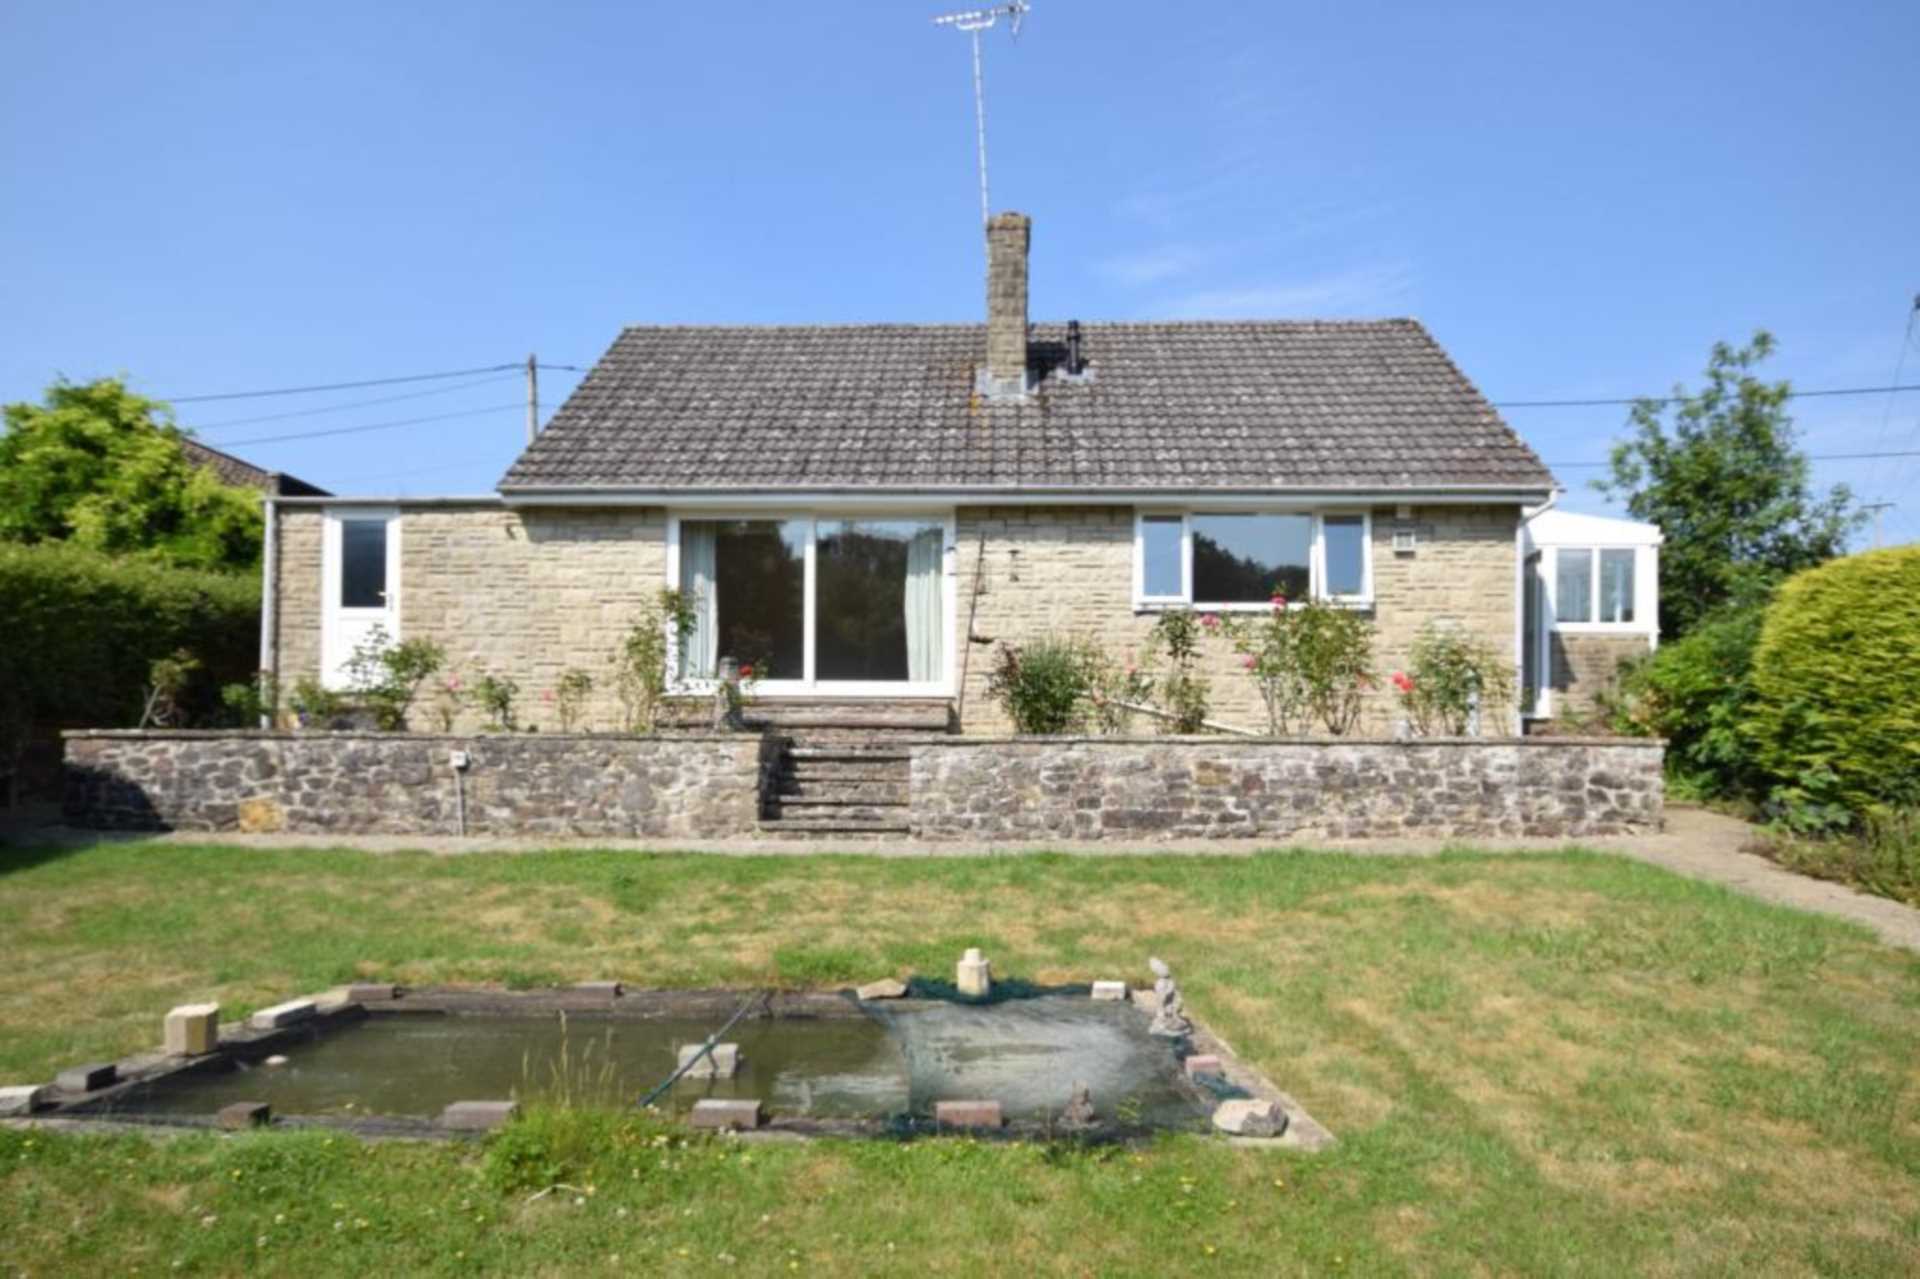 Swallows Property Letting - 2 Bedroom Bungalow, Godminster Lane, Bruton